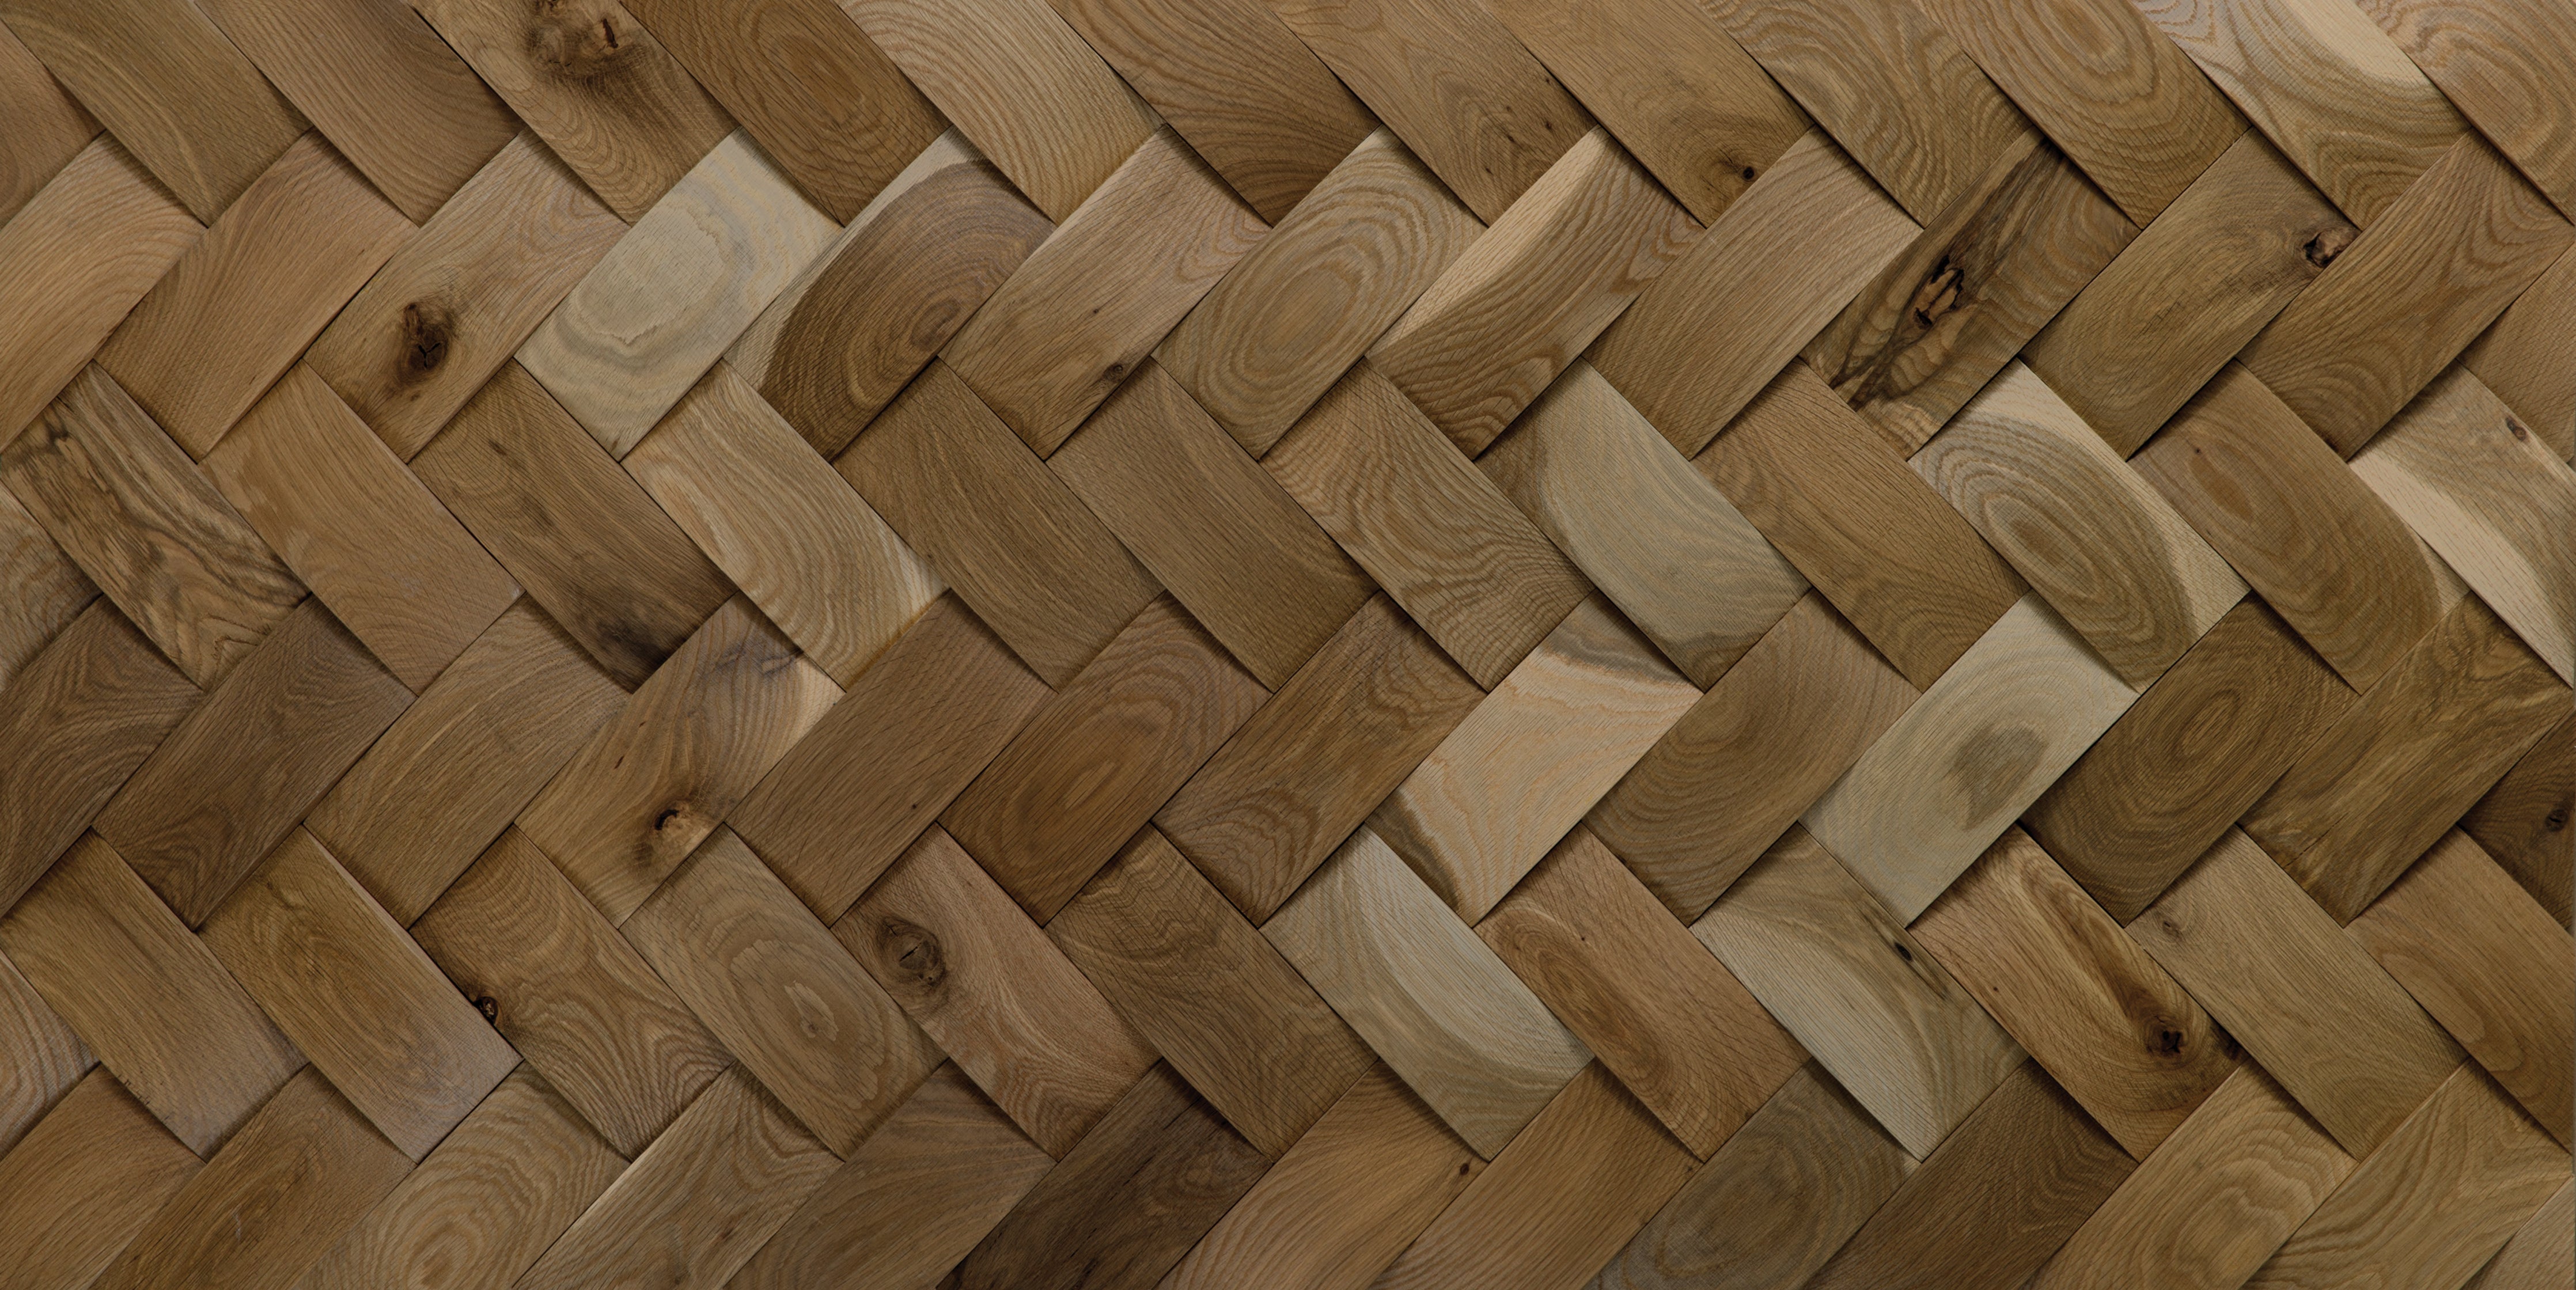 duchateau inceptiv tresses olde dutch oak three dimensional wall natural wood panel lacquer for interior use distributed by surface group international